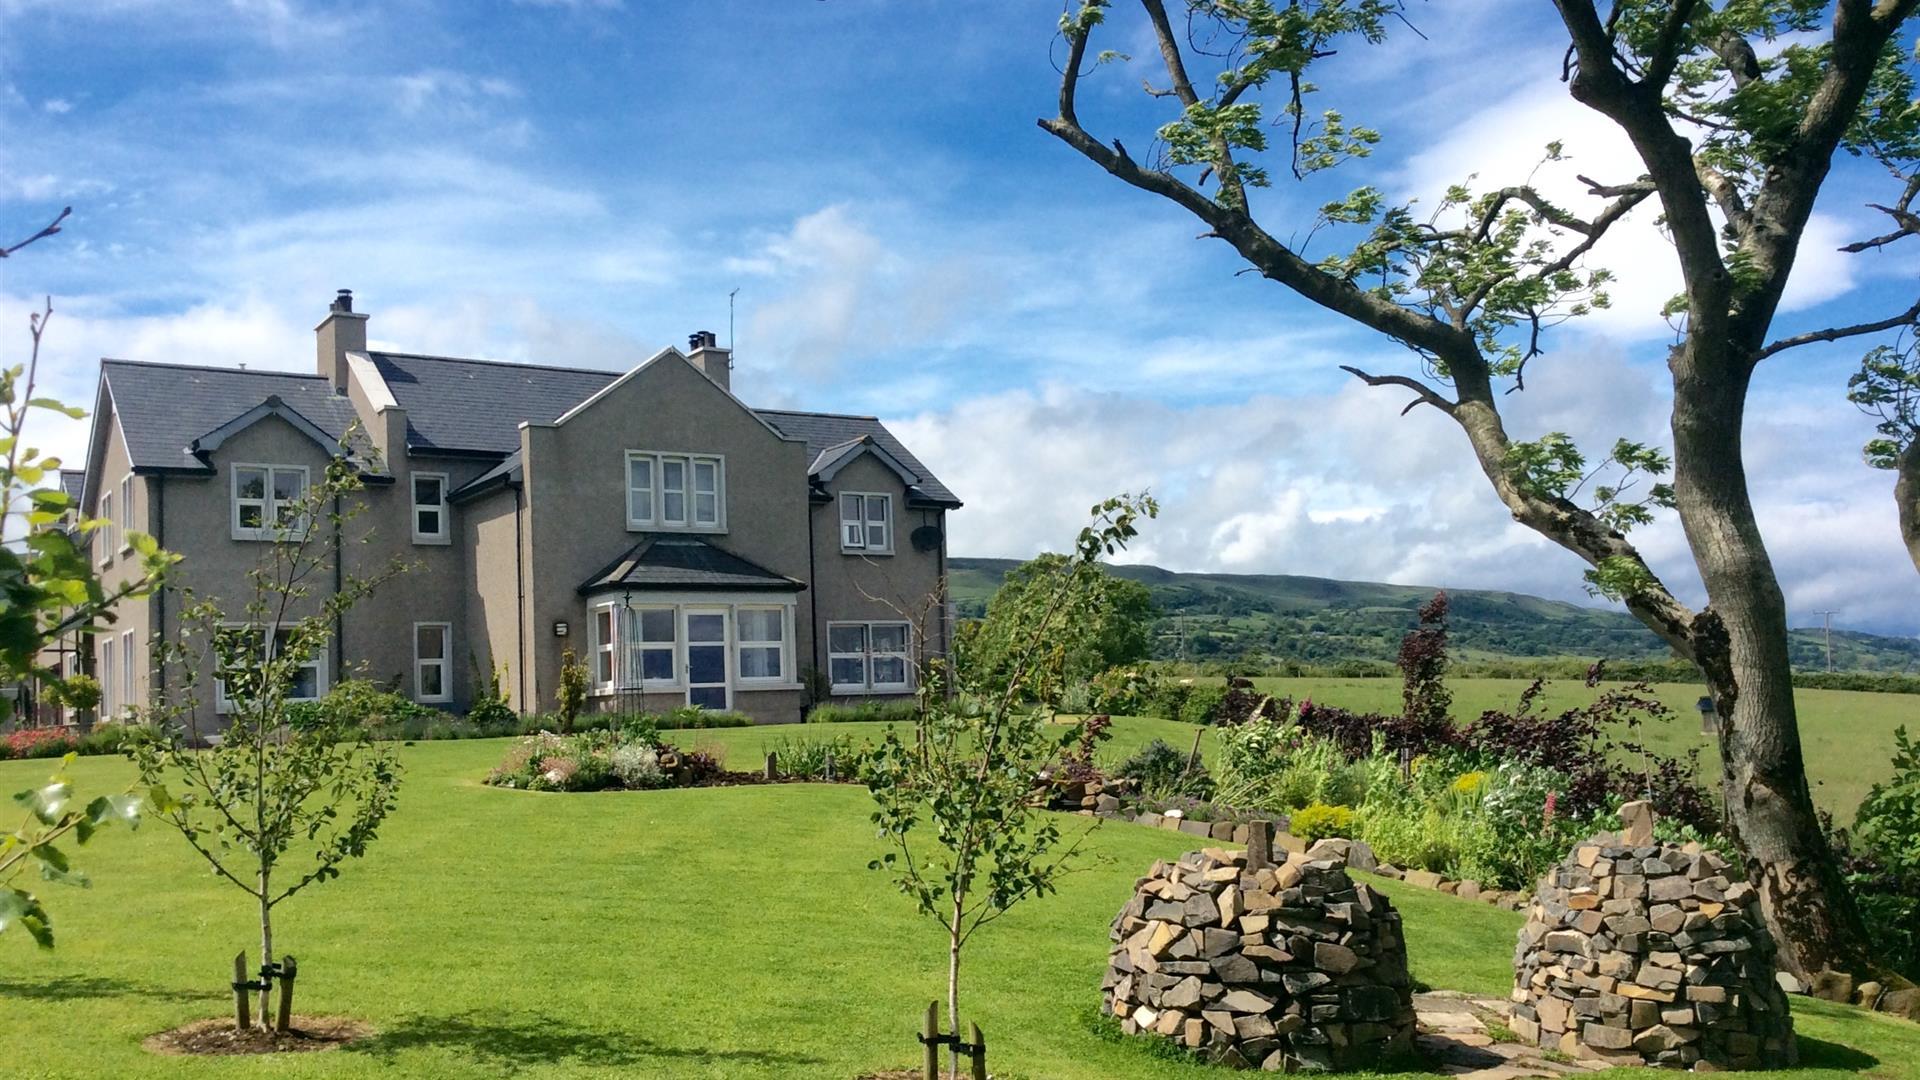 View of BallyCairn House from front garden. Situated on an elevated, picturesque location overlooking the Irish Sea with backdrop views of the Antrim